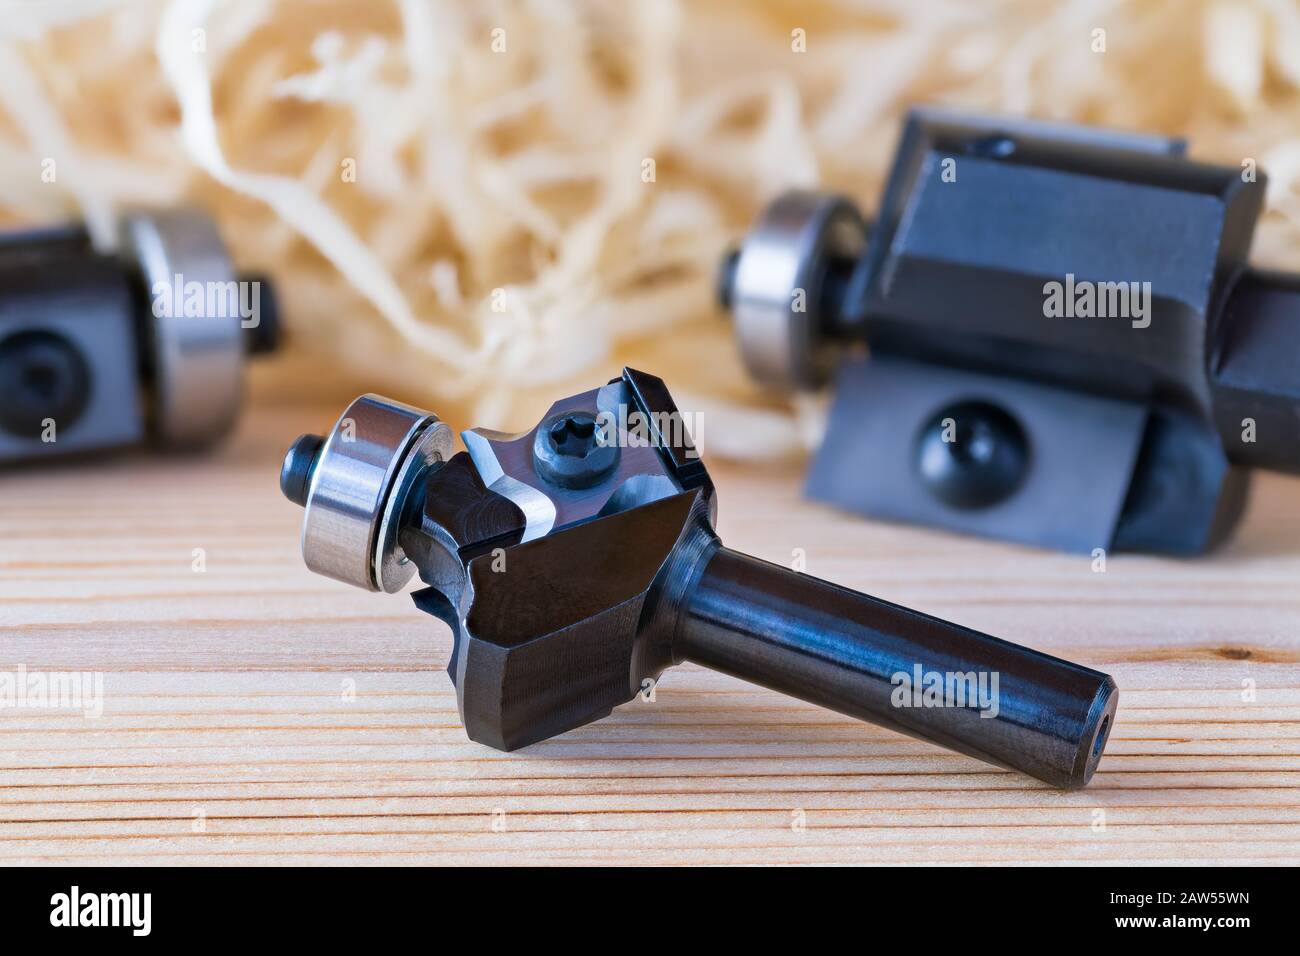 Trimming shank router cutters. Milling cutting tools on wood background. Shaping copying endmills with replaceable knives with 4 edges. Shavings pile. Stock Photo